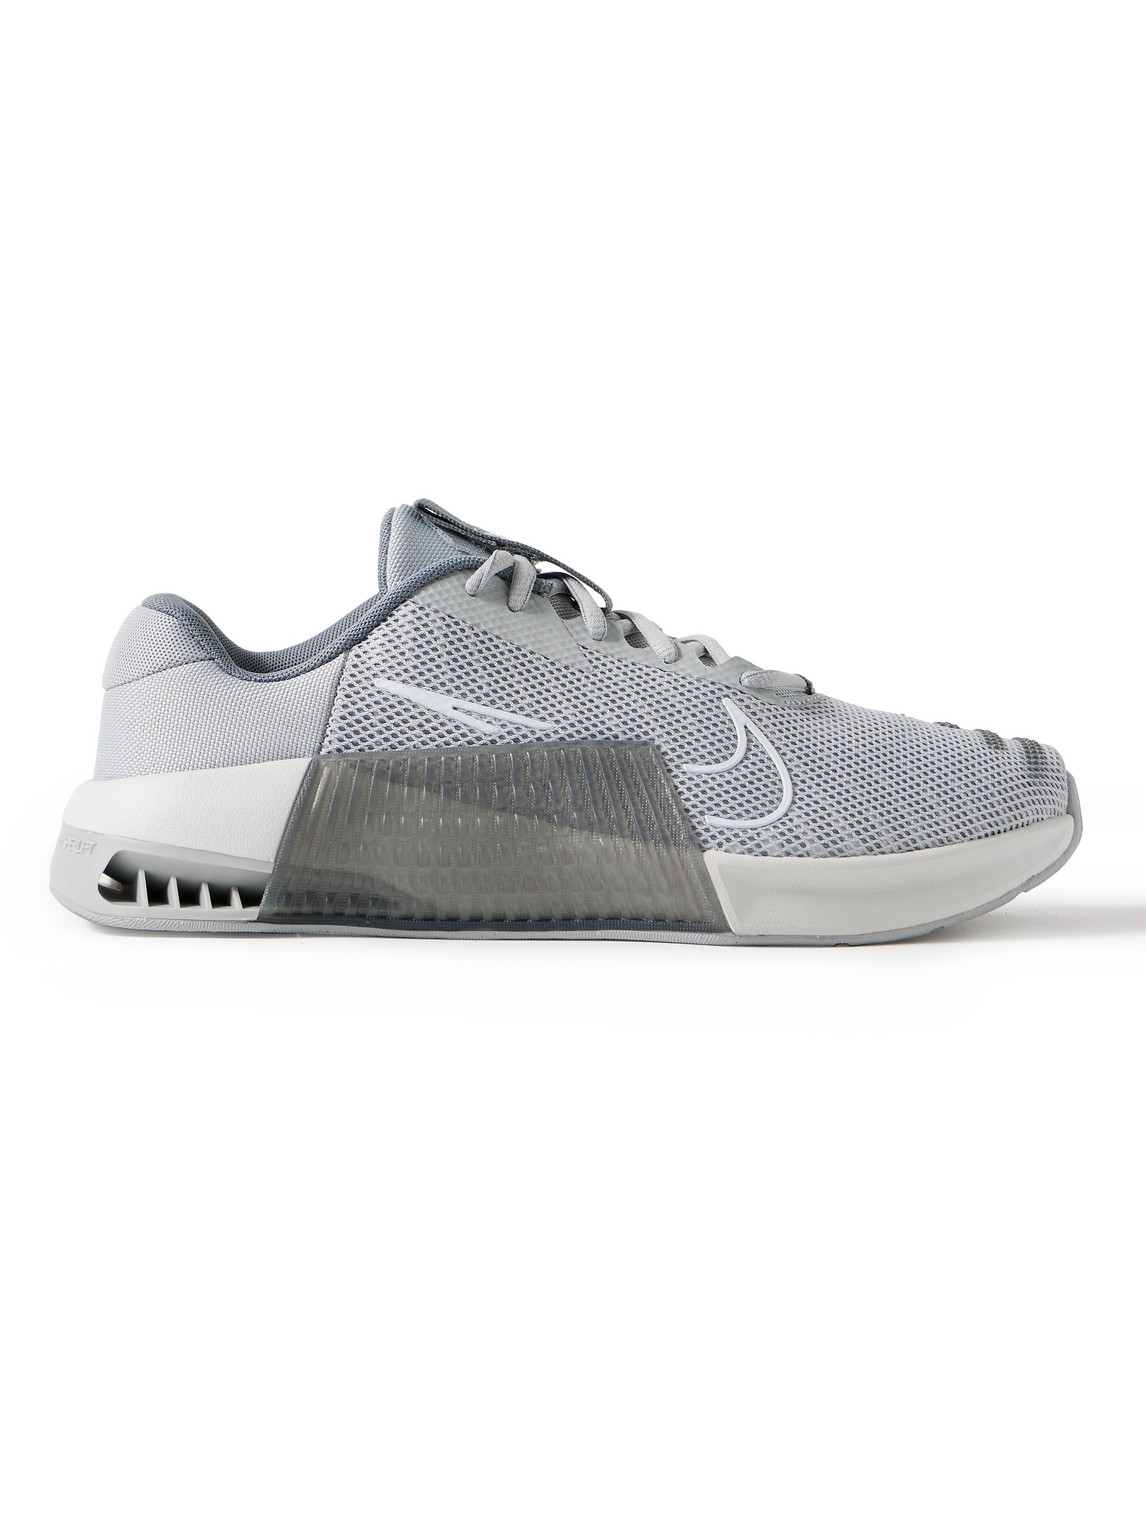 Metcon 9 Rubber-Trimmed Mesh Sneakers